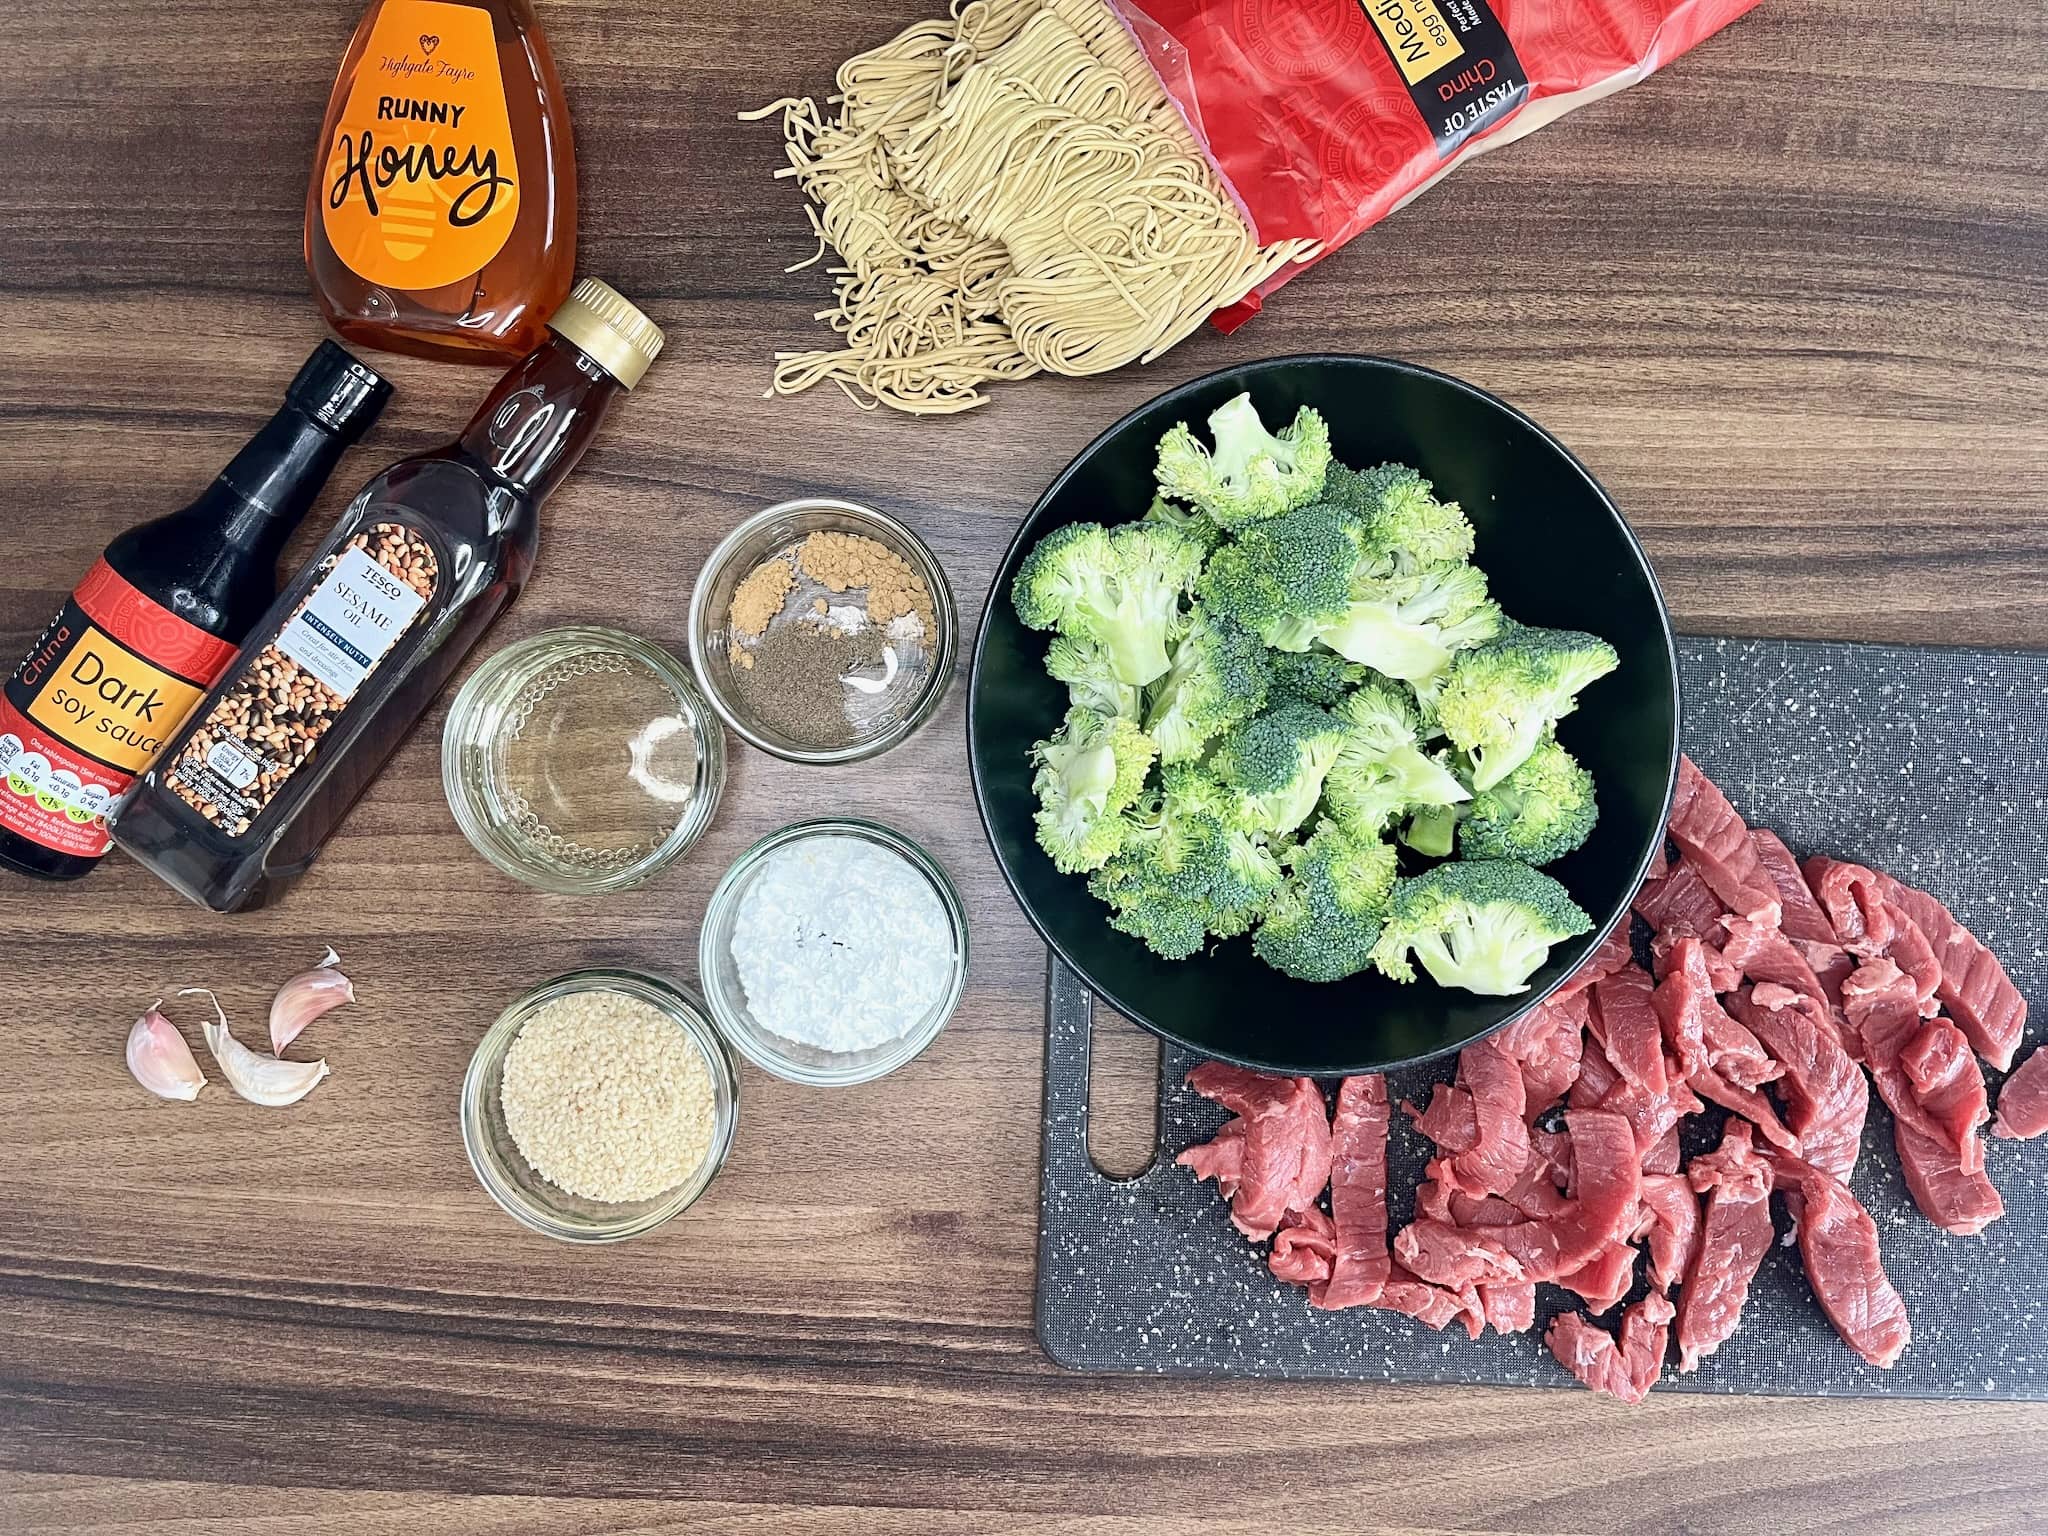 Ingredients for beef and broccoli with egg noodles one-pot dinner on table top